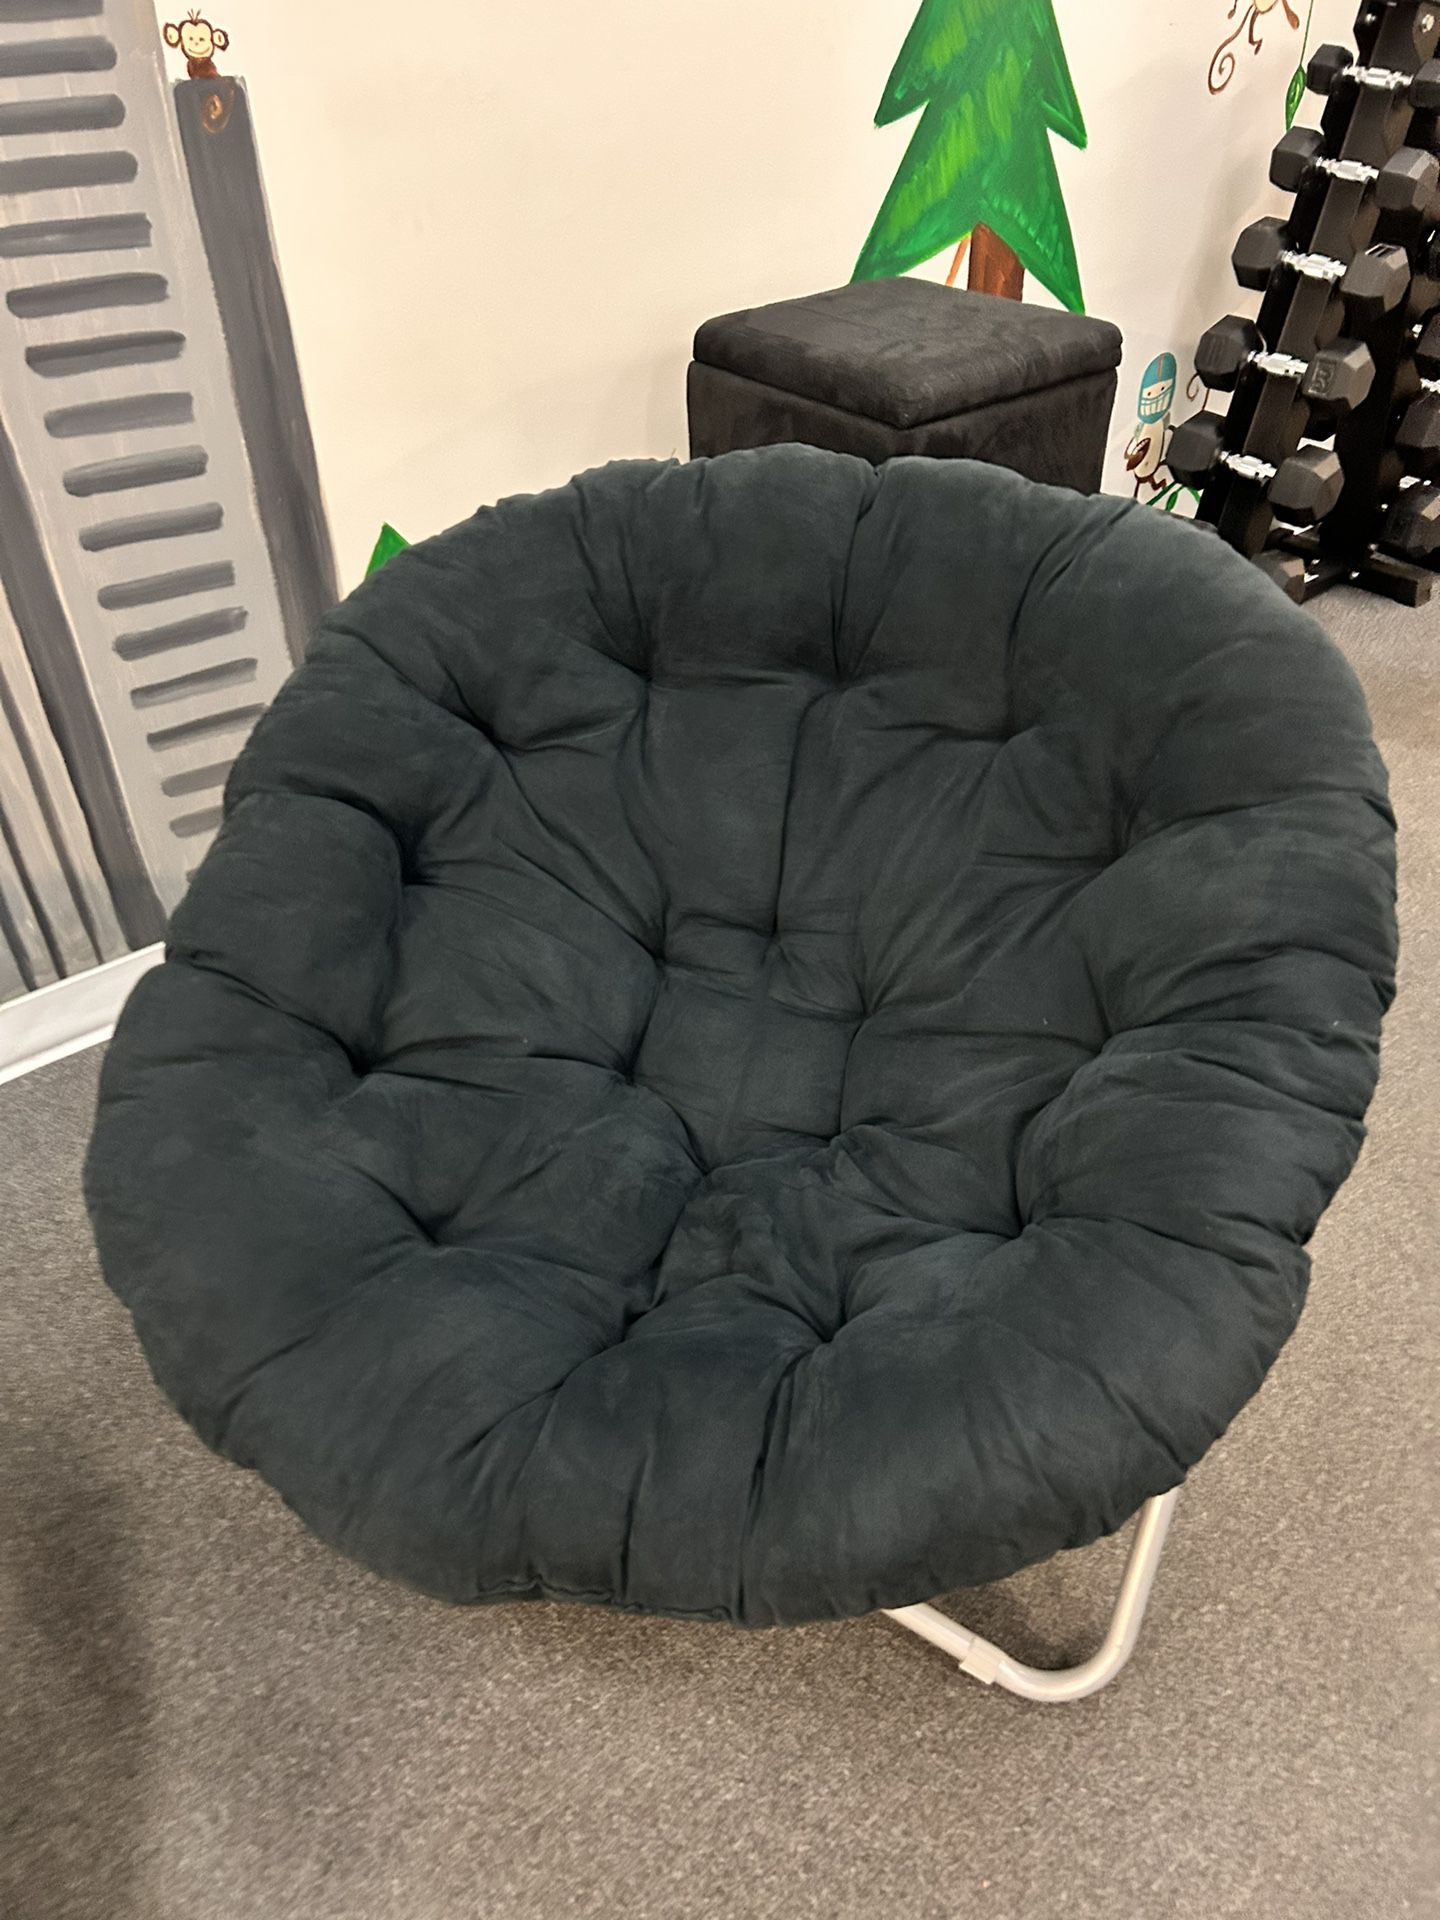 Satellite Comfy Moon Saucer Foldable Chair 